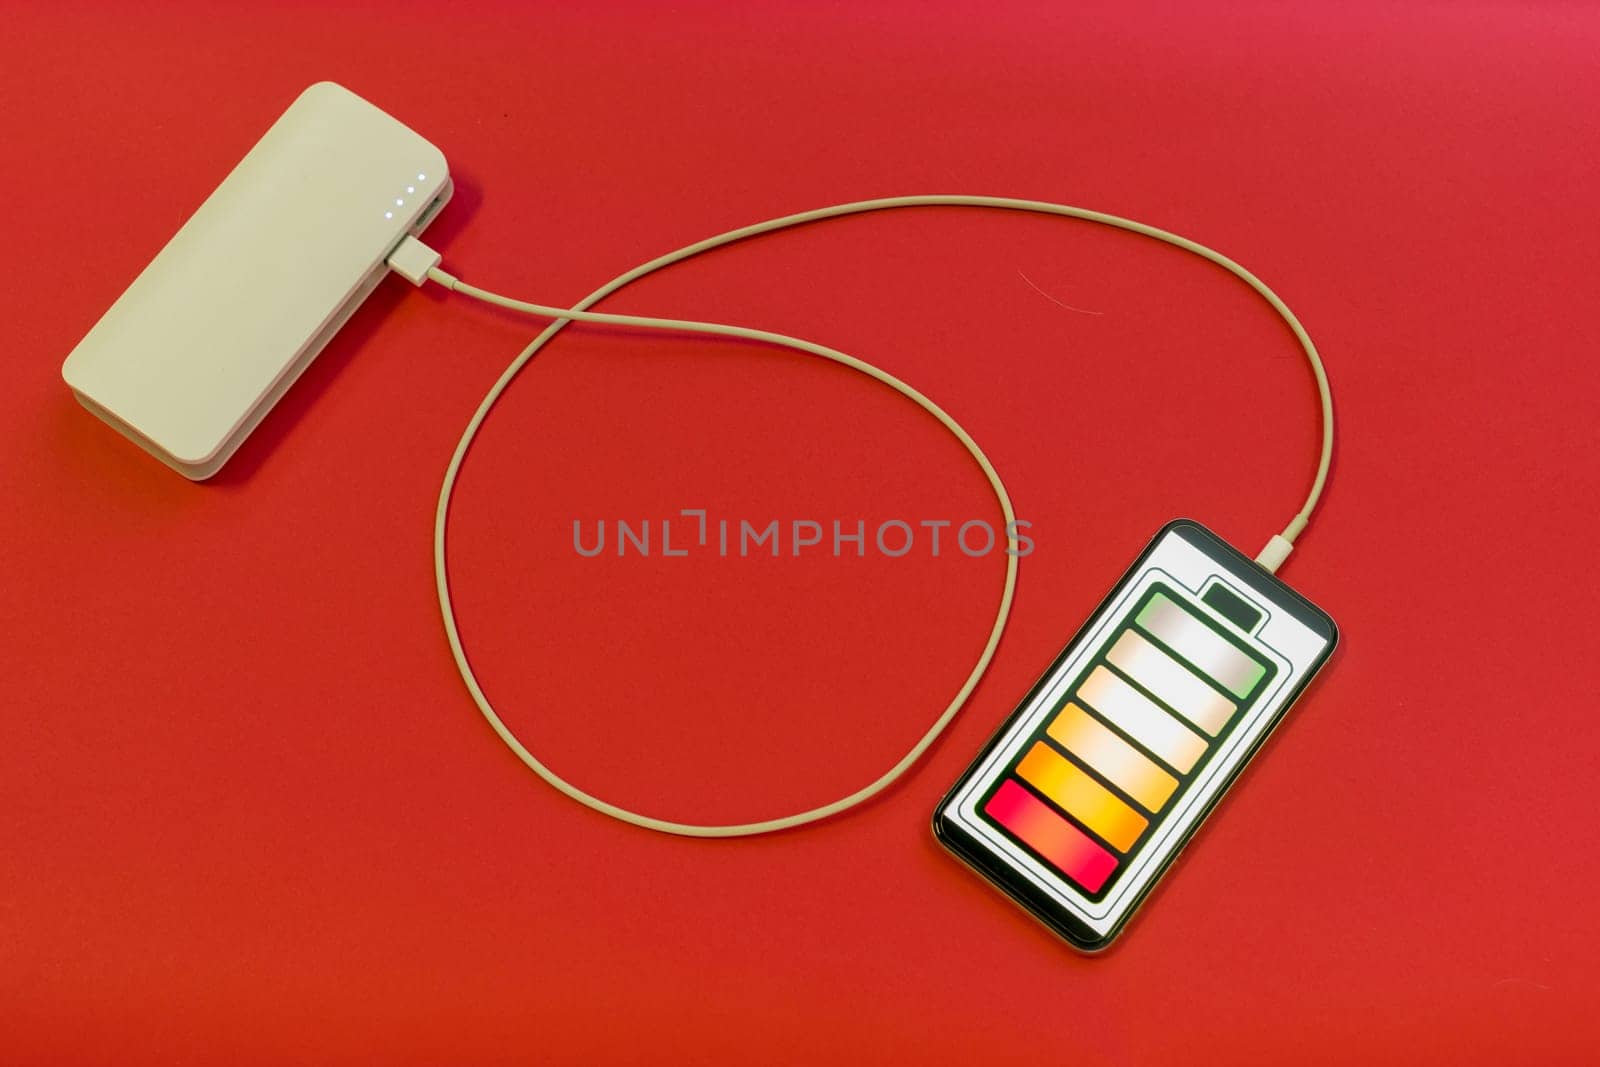 Smartphone is charging with power bank on red background by zartarn